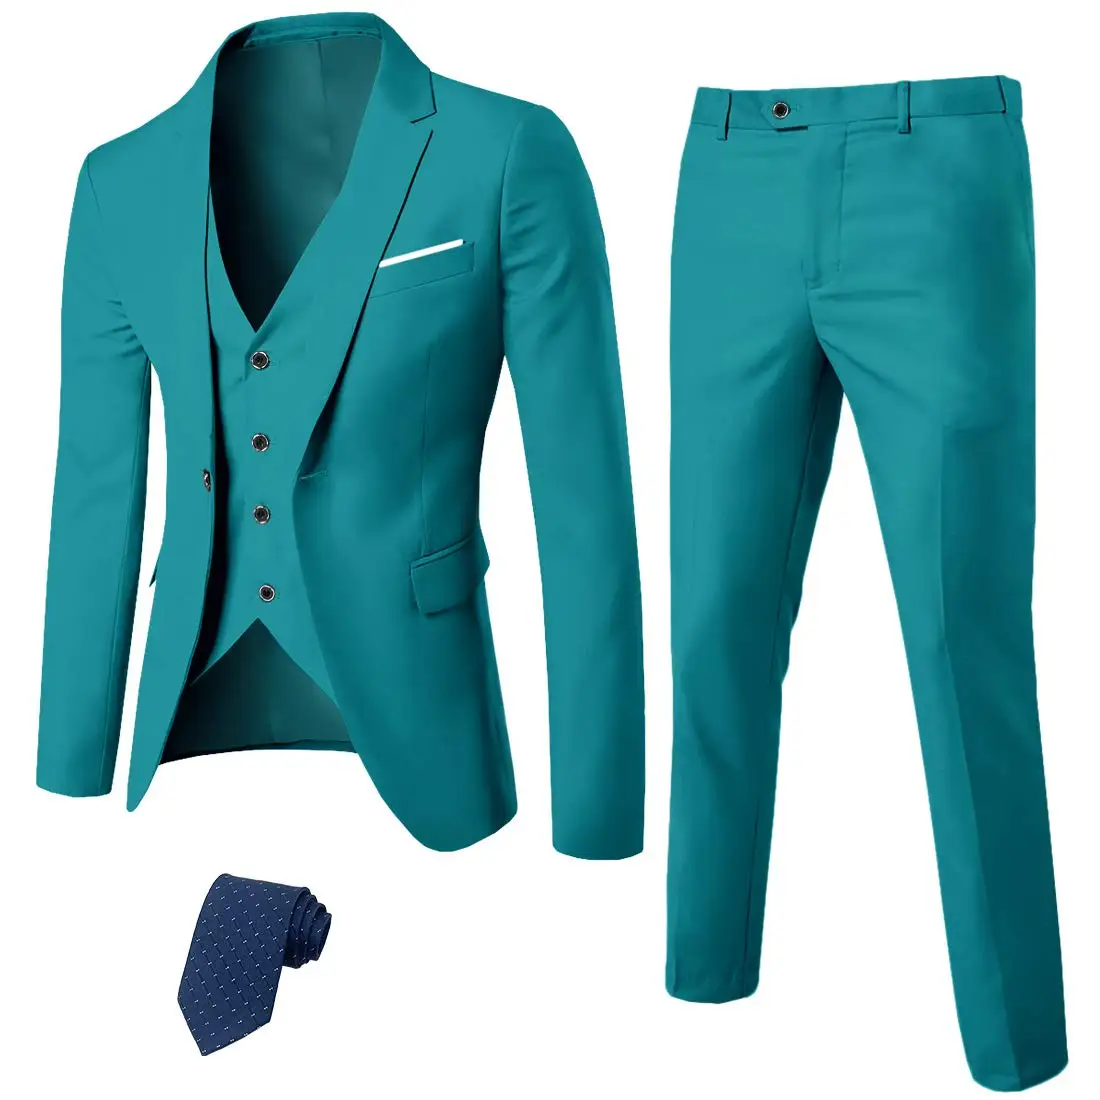 

Wholesale Custom Made Slim Fit Wedding Men's Suits Set Business Suits Groom Tuxedos Formal Suits 3Pieces